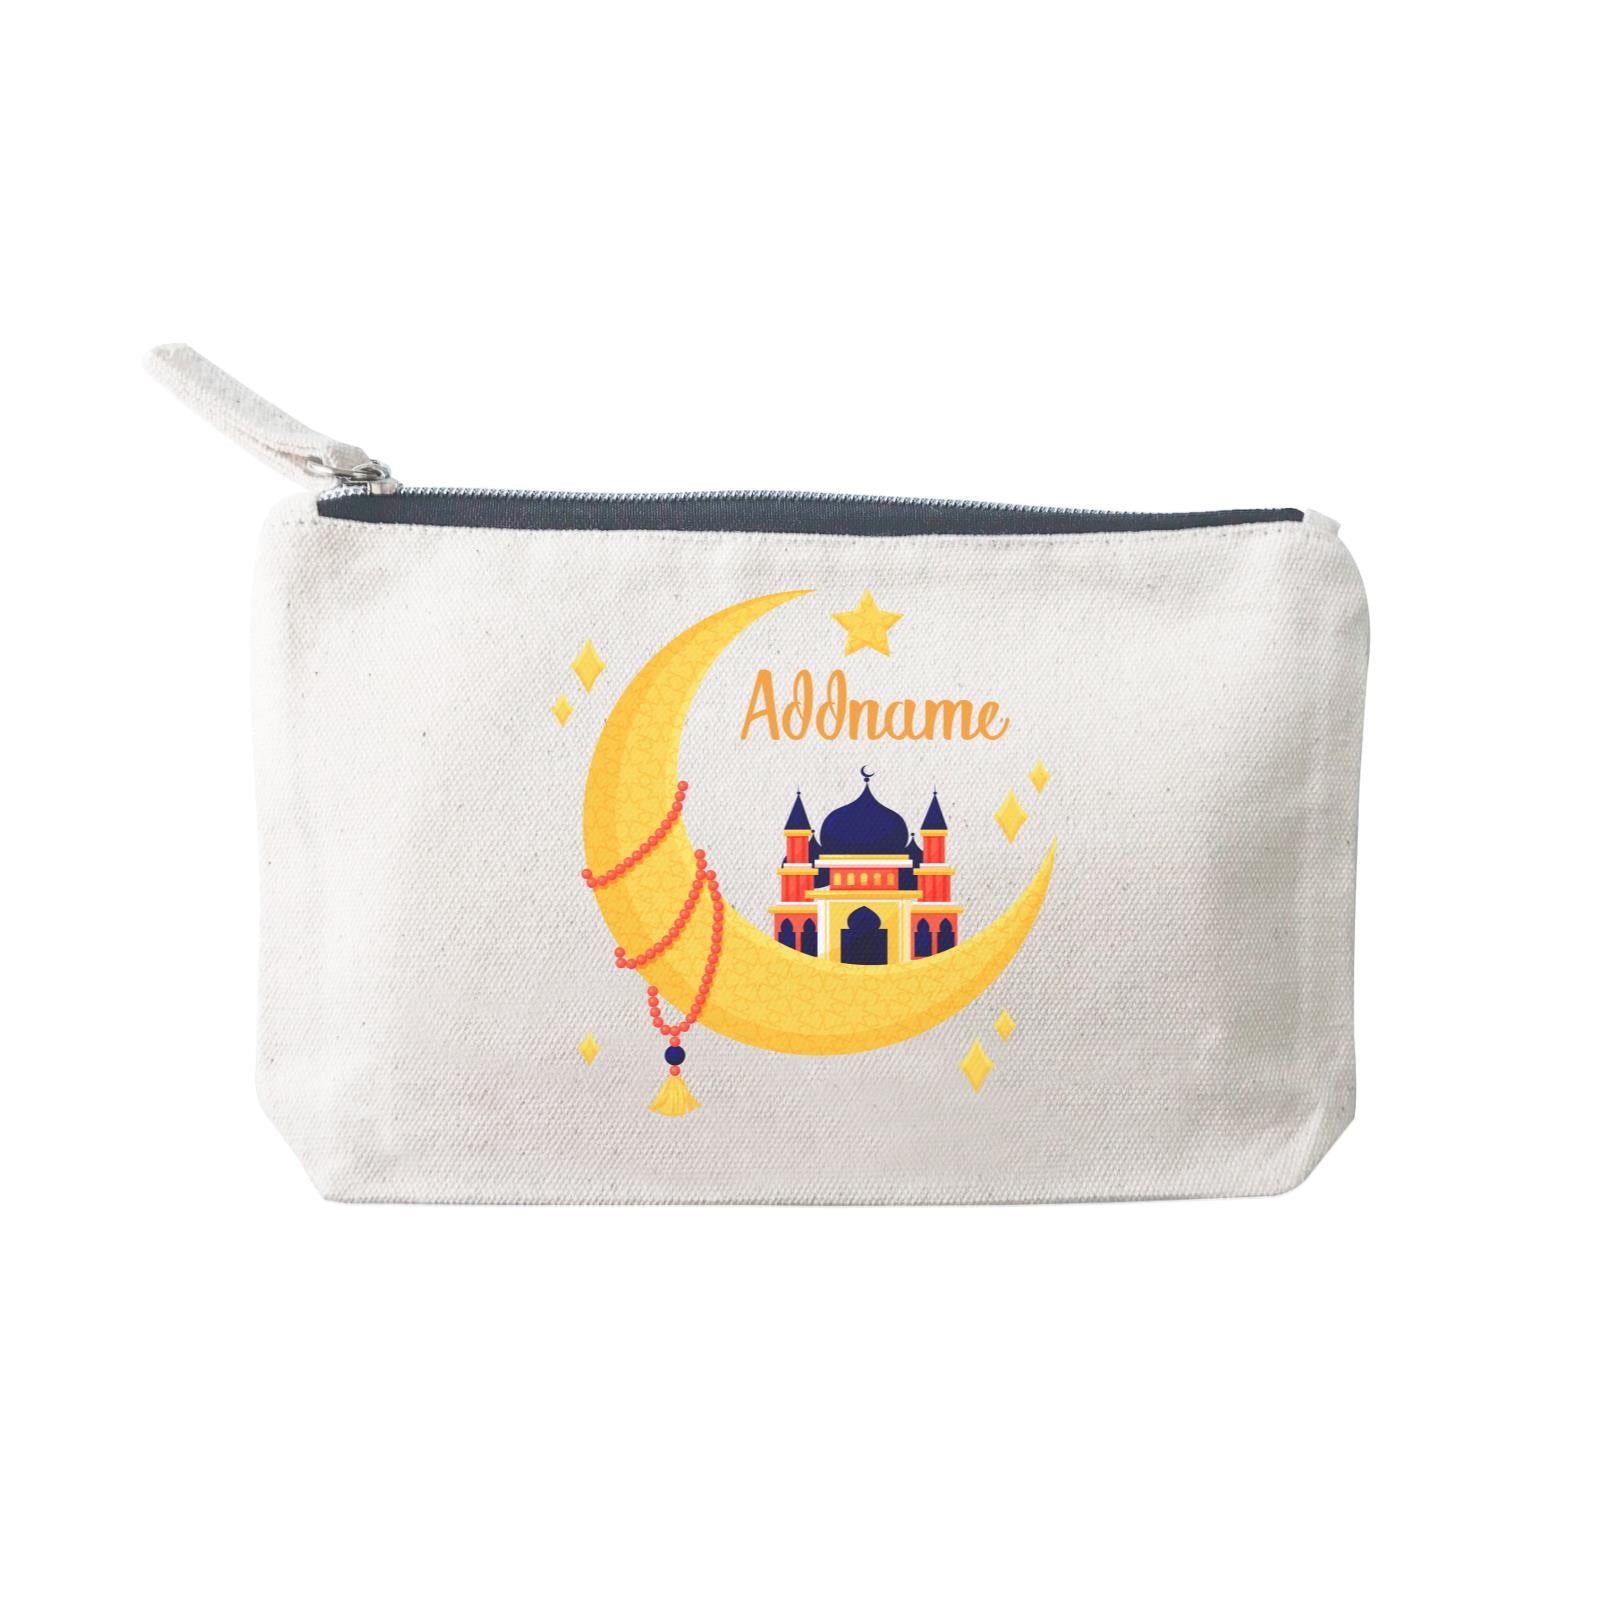 Raya Moon Islamic Moon Star And Mosque Addname Mini Accessories Stationery Pouch 2